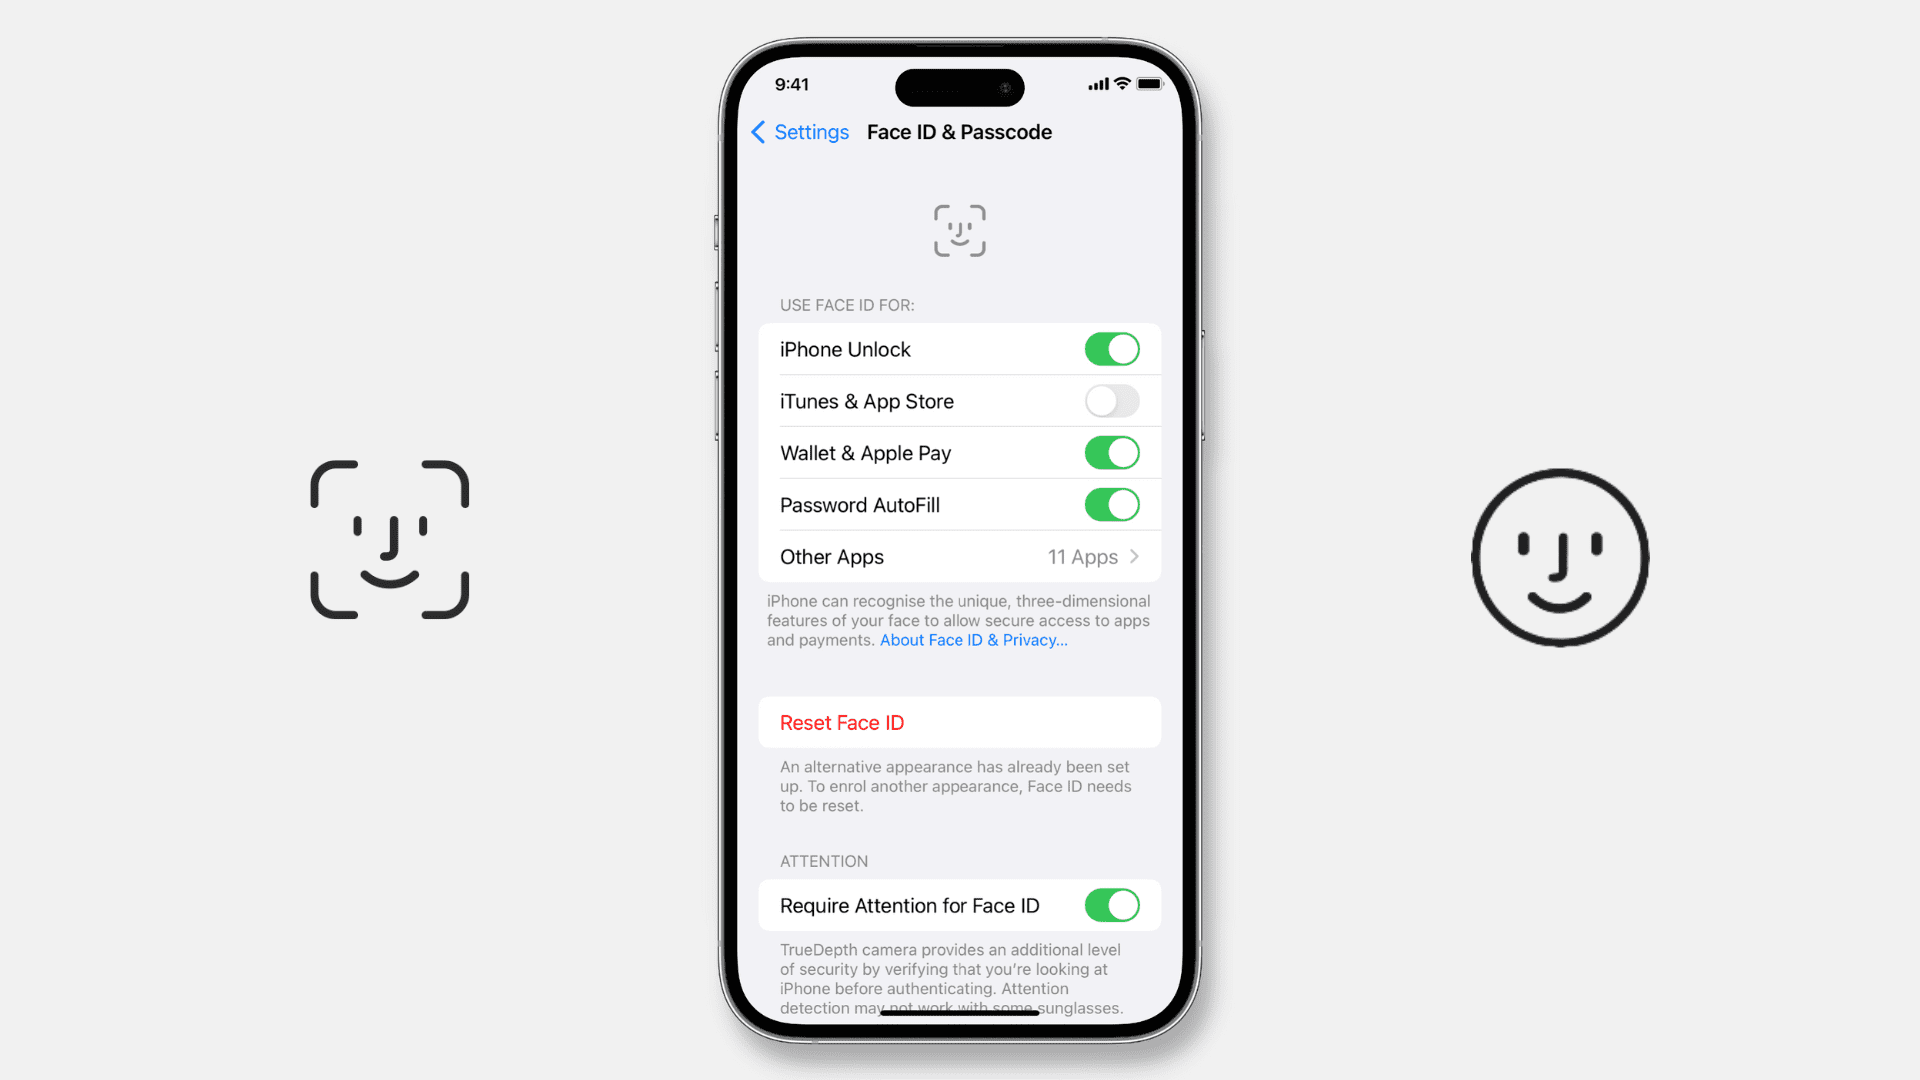 Face ID settings on iPhone with the official Face ID logo